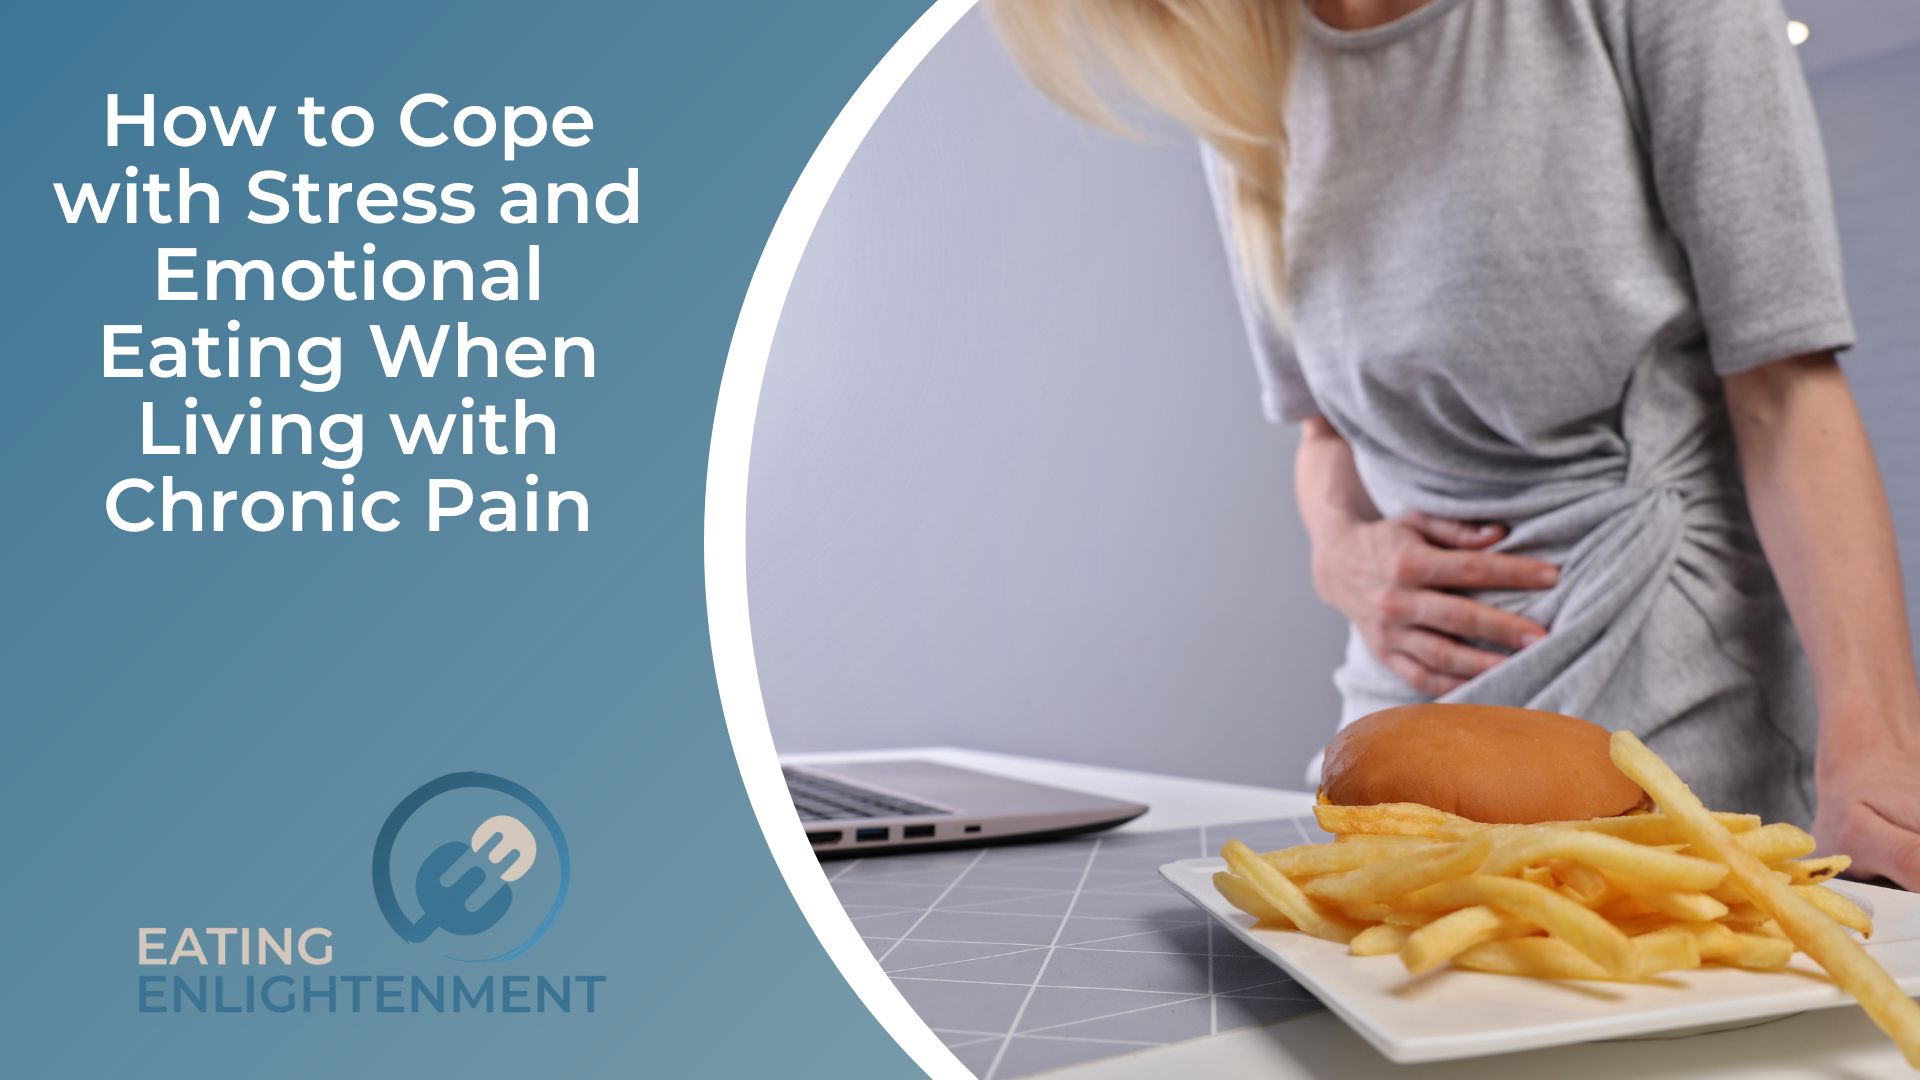 How to Cope with Stress and Emotional Eating When Living with Chronic Pain